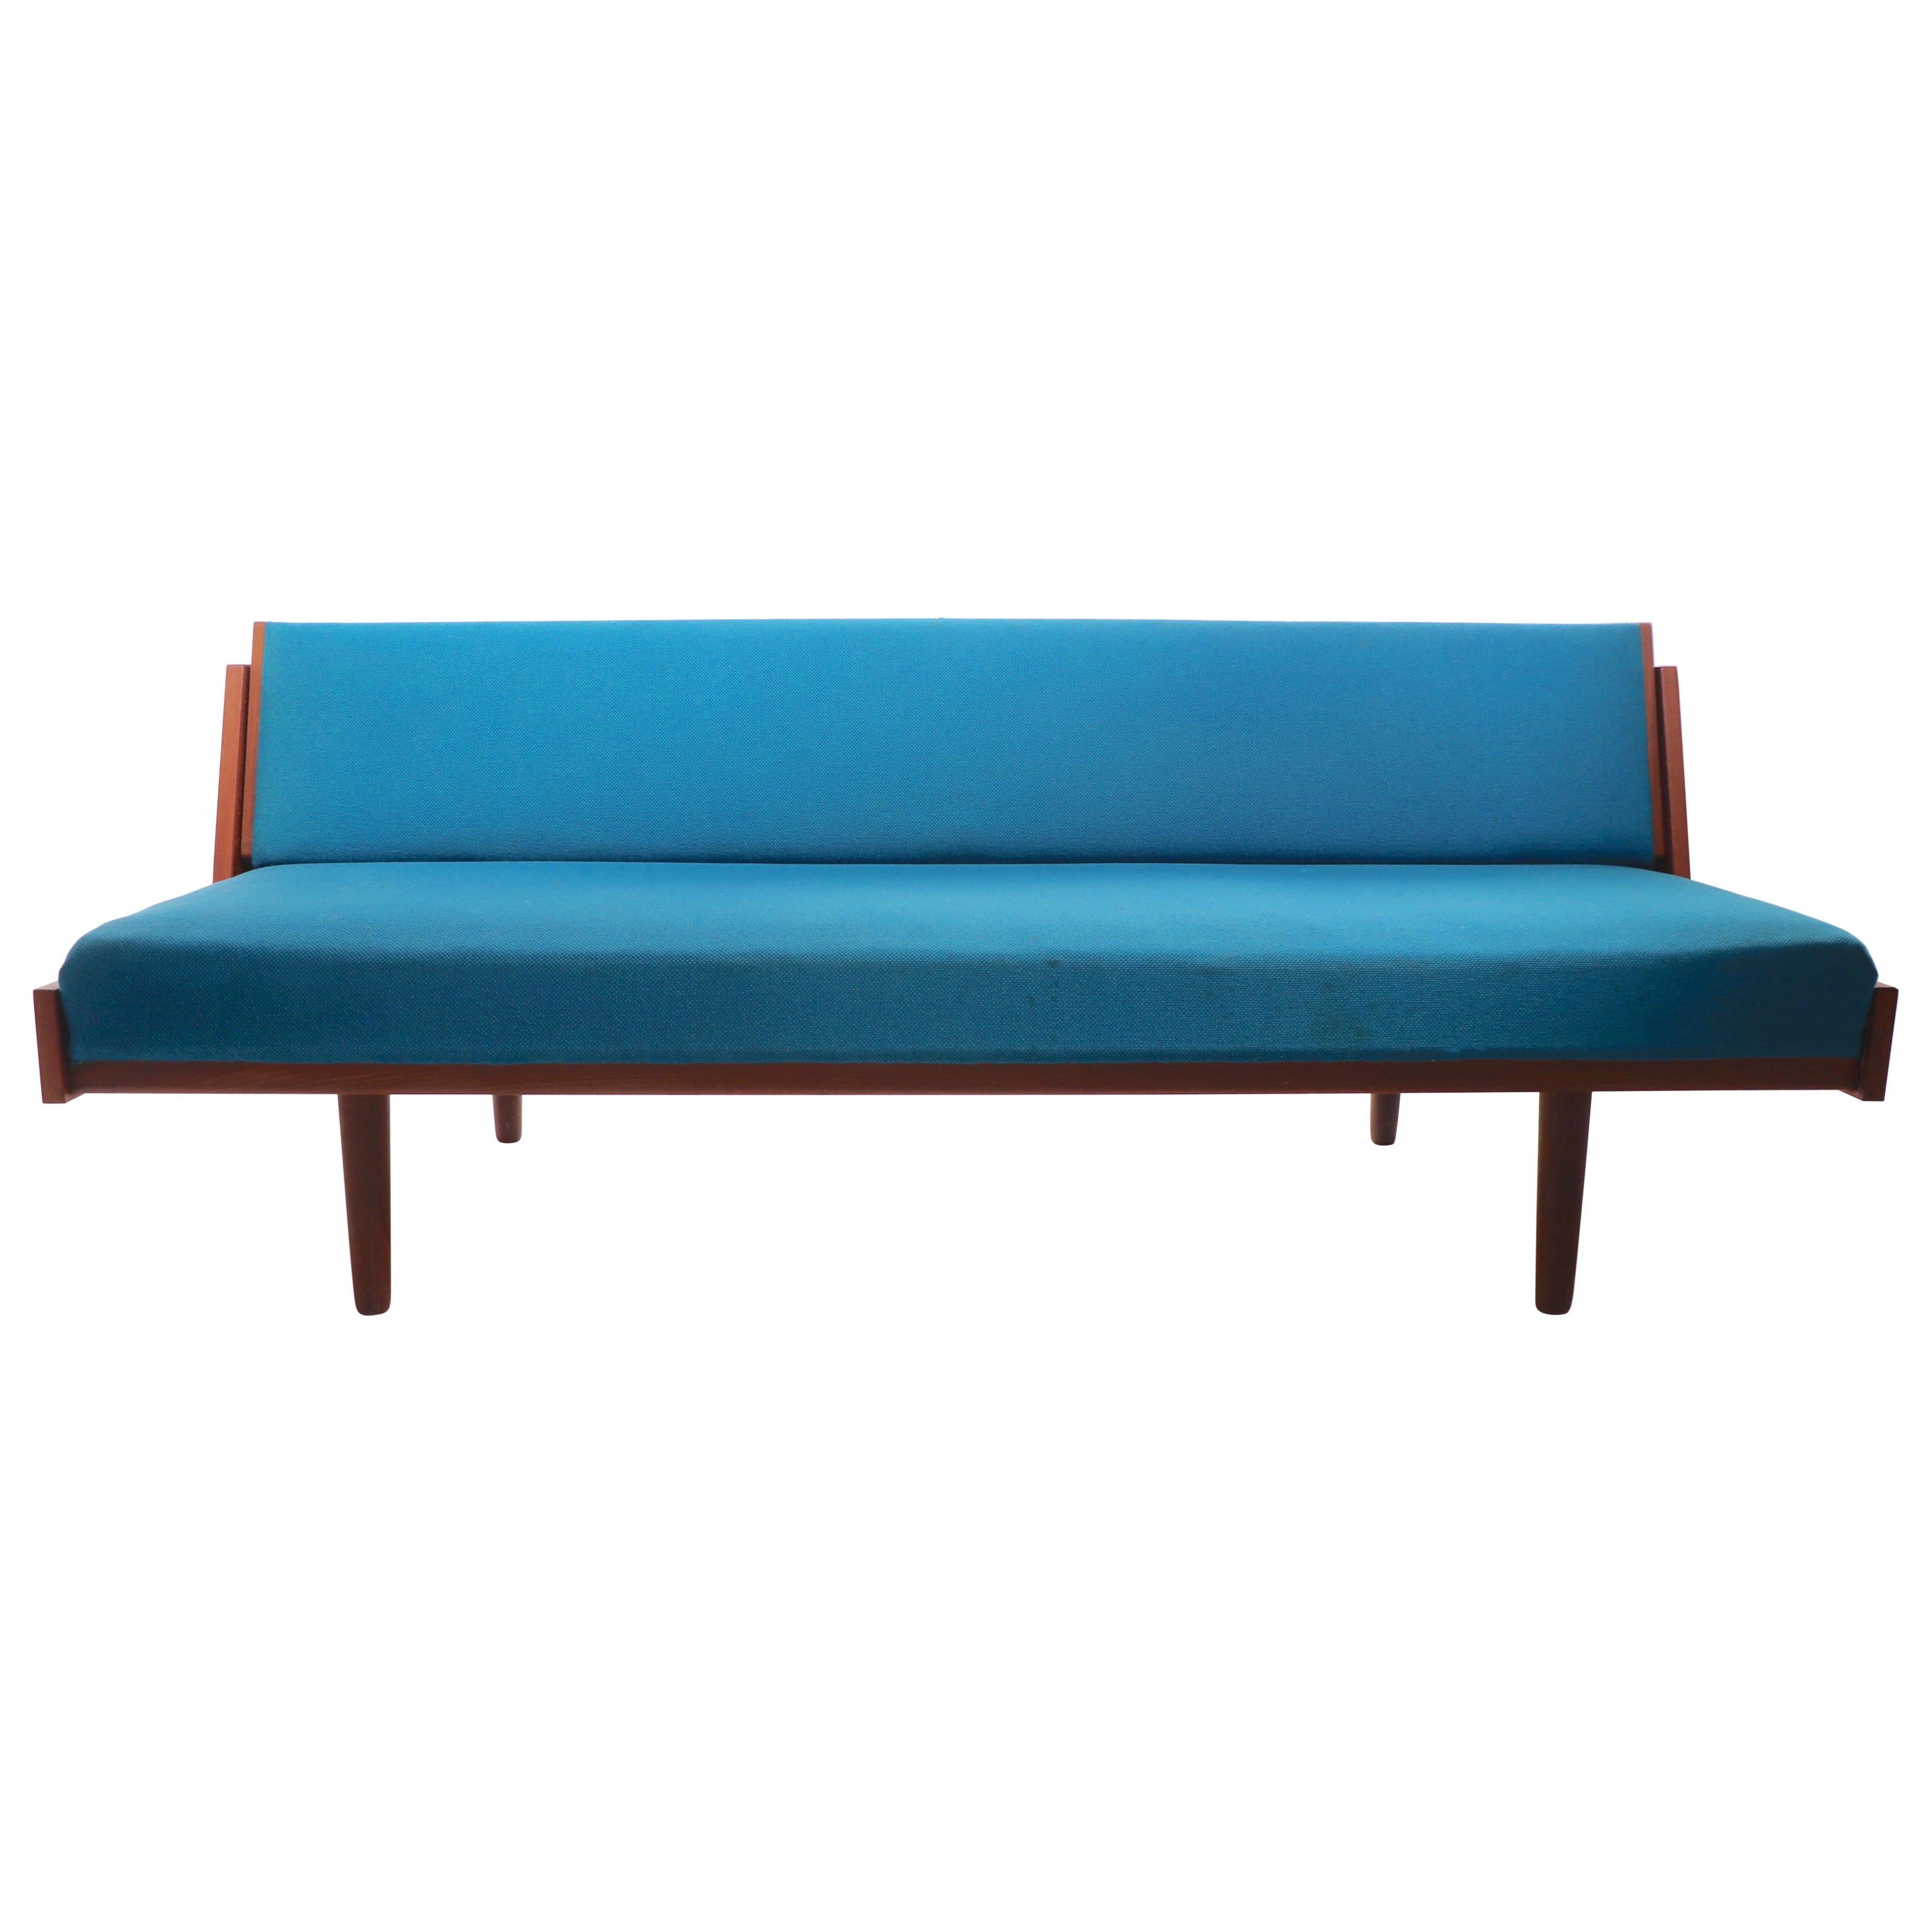 Danish Mid-Century Modern Daybed Sofa by Hans Wegner for Getma For Sale